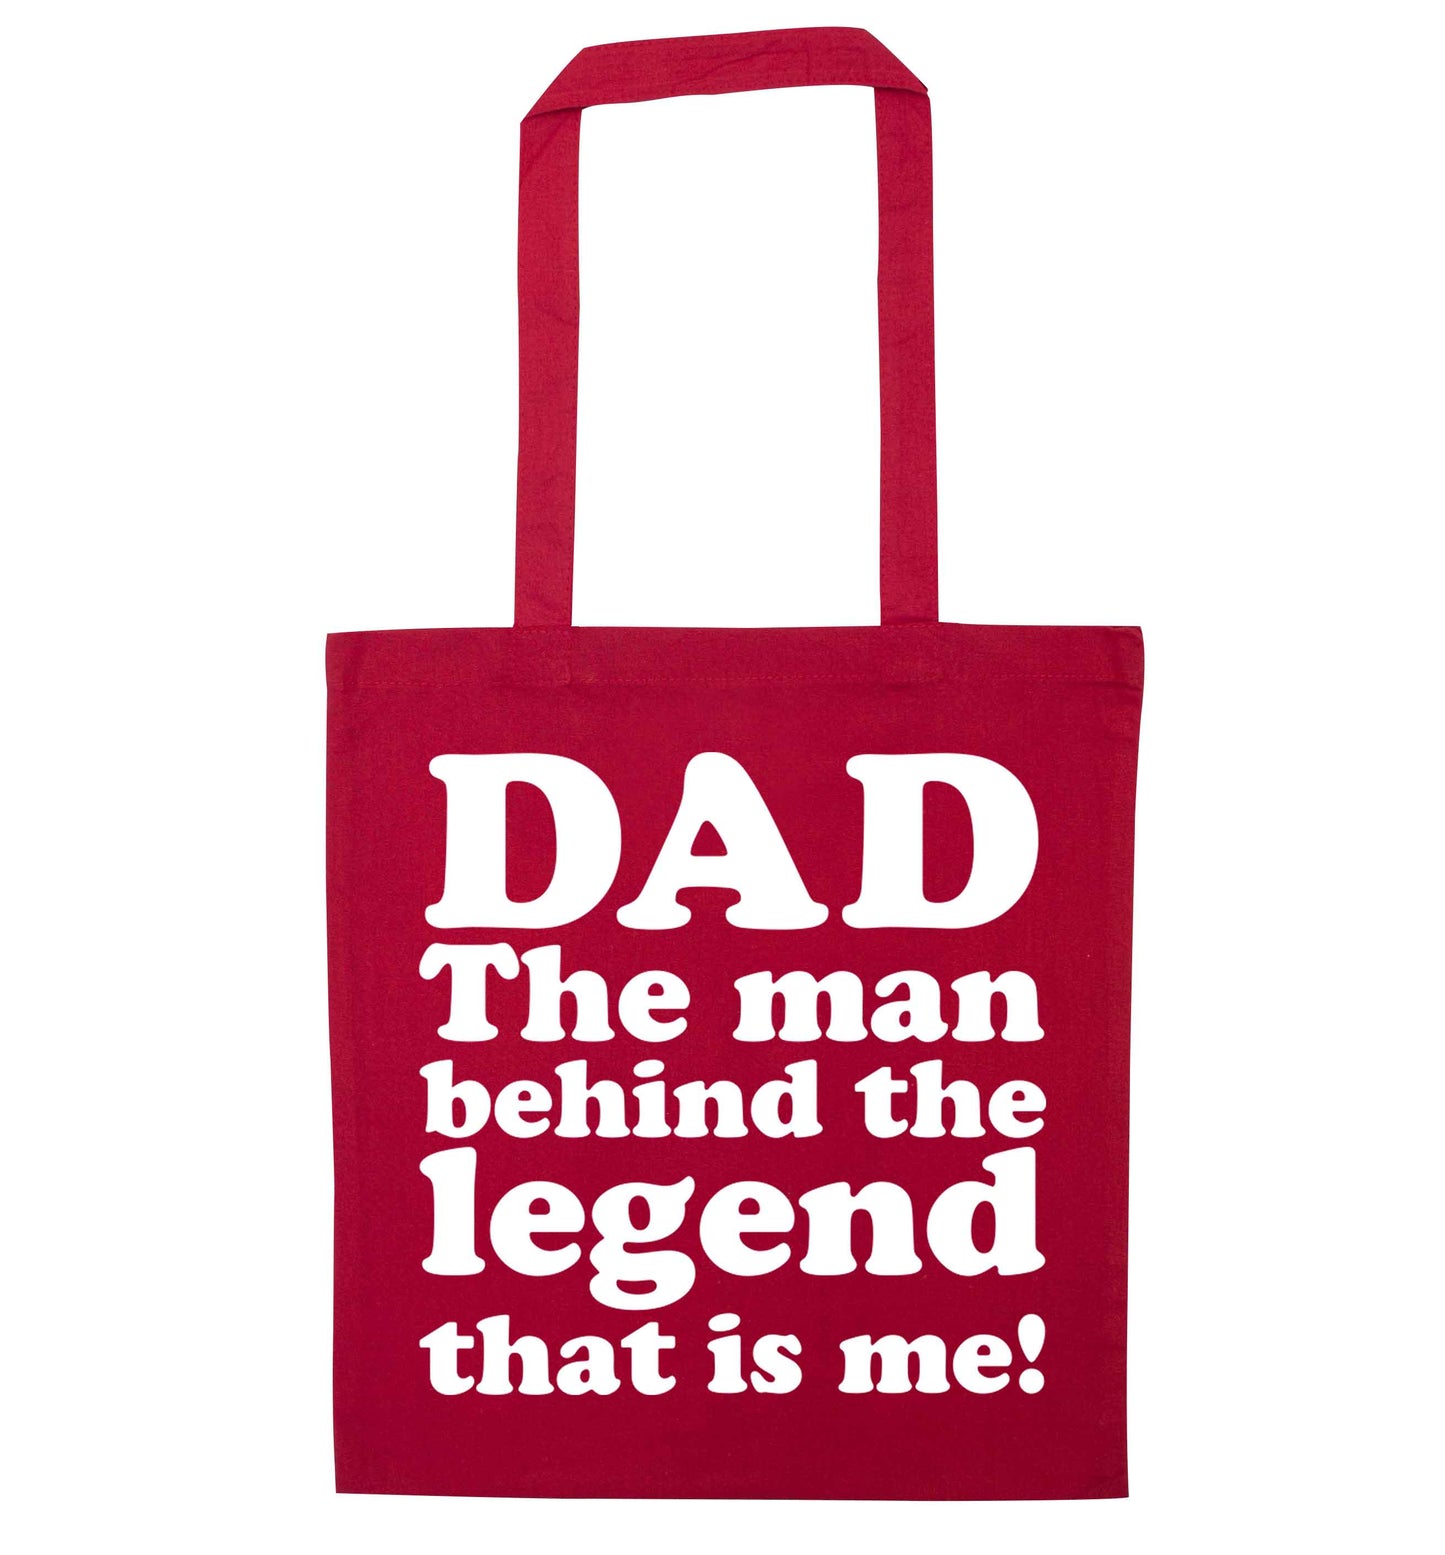 Dad the man behind the legend that is me red tote bag